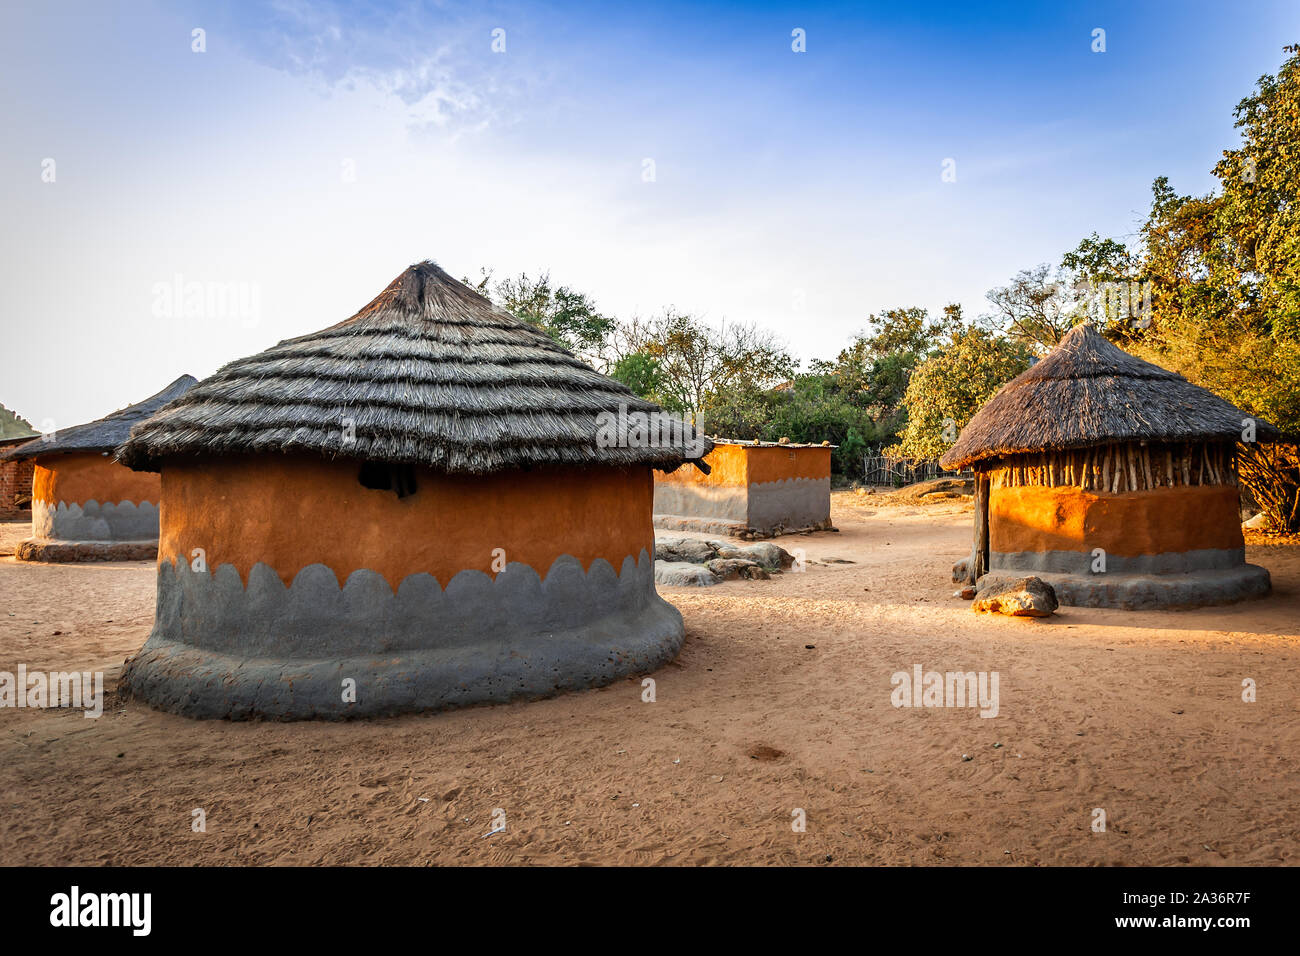 Local village with traditional zimbabwian huts from clay and hay. Matobo, Matabeleland province, Zimbabwe, Africa Stock Photo